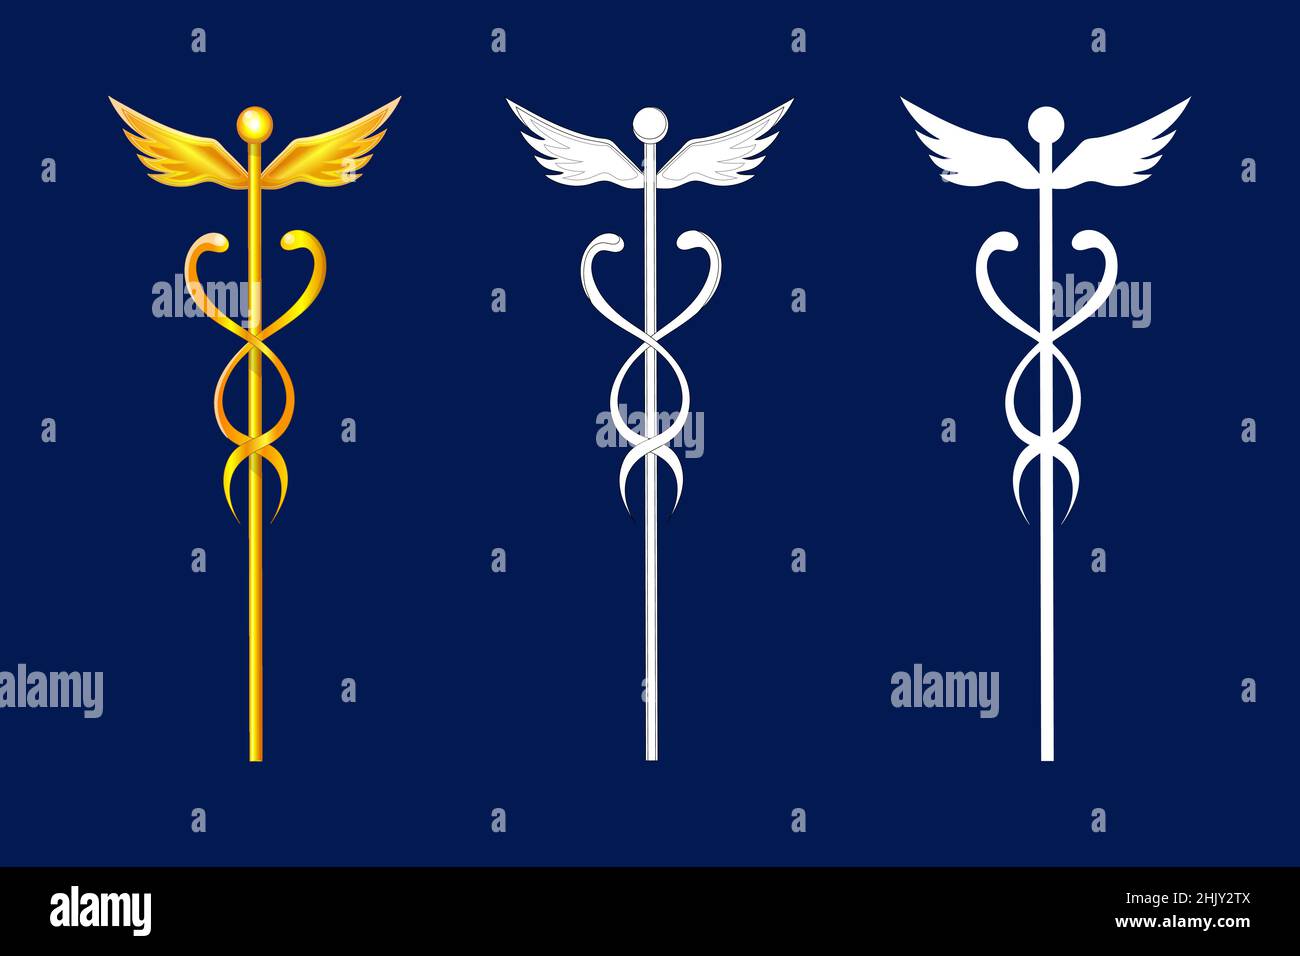 Caduceus, winged wand with serpents, of Hermes, Mercury, Greek or Roman god of commerce. Trade symbol Stock Vector